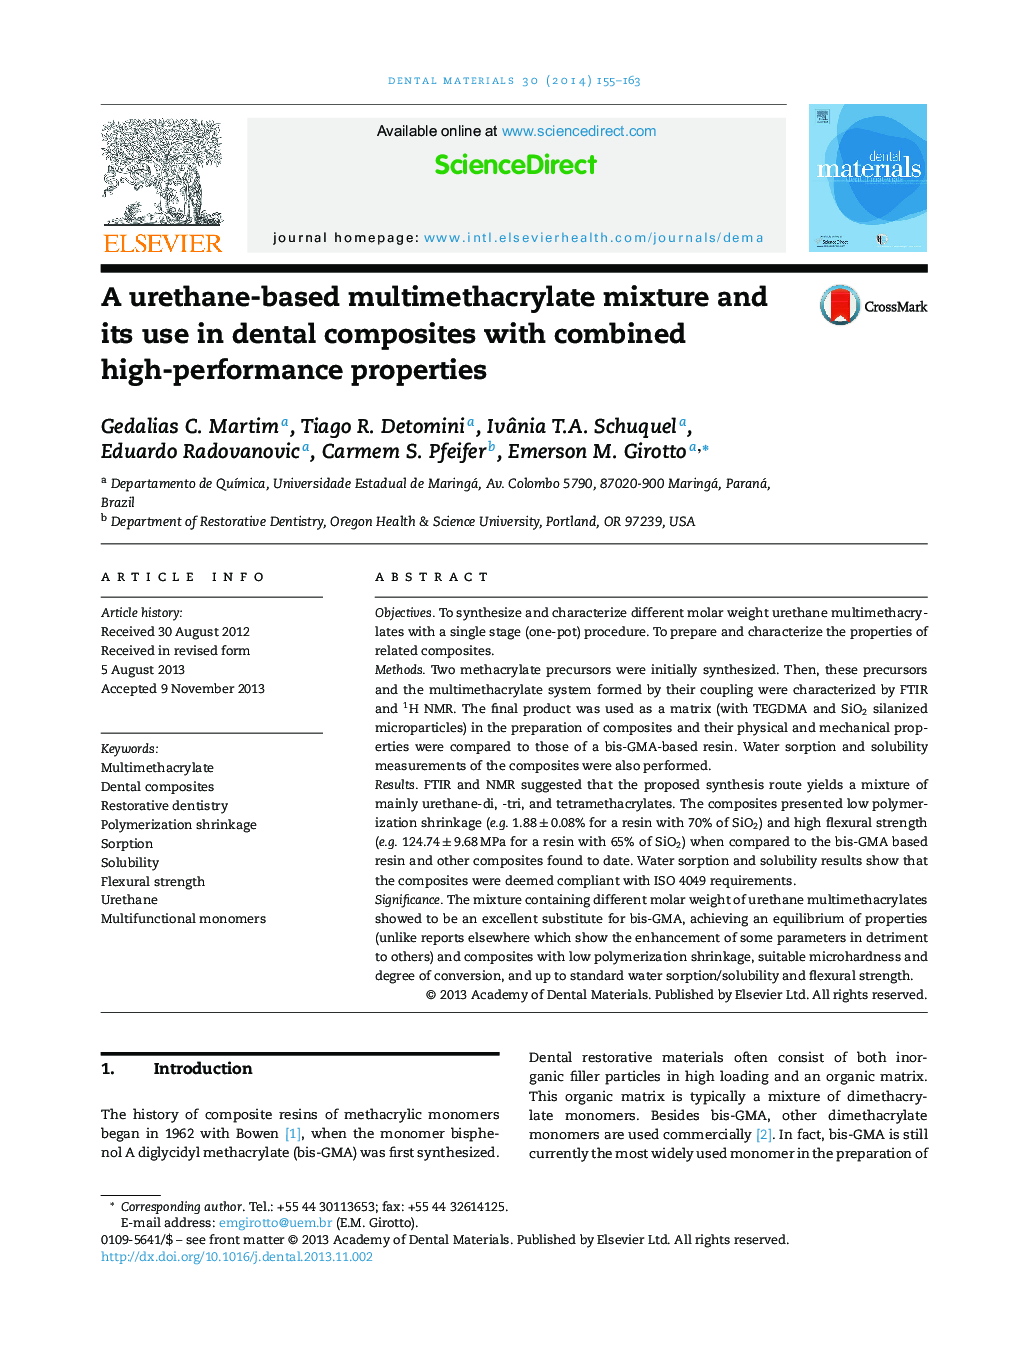 A urethane-based multimethacrylate mixture and its use in dental composites with combined high-performance properties